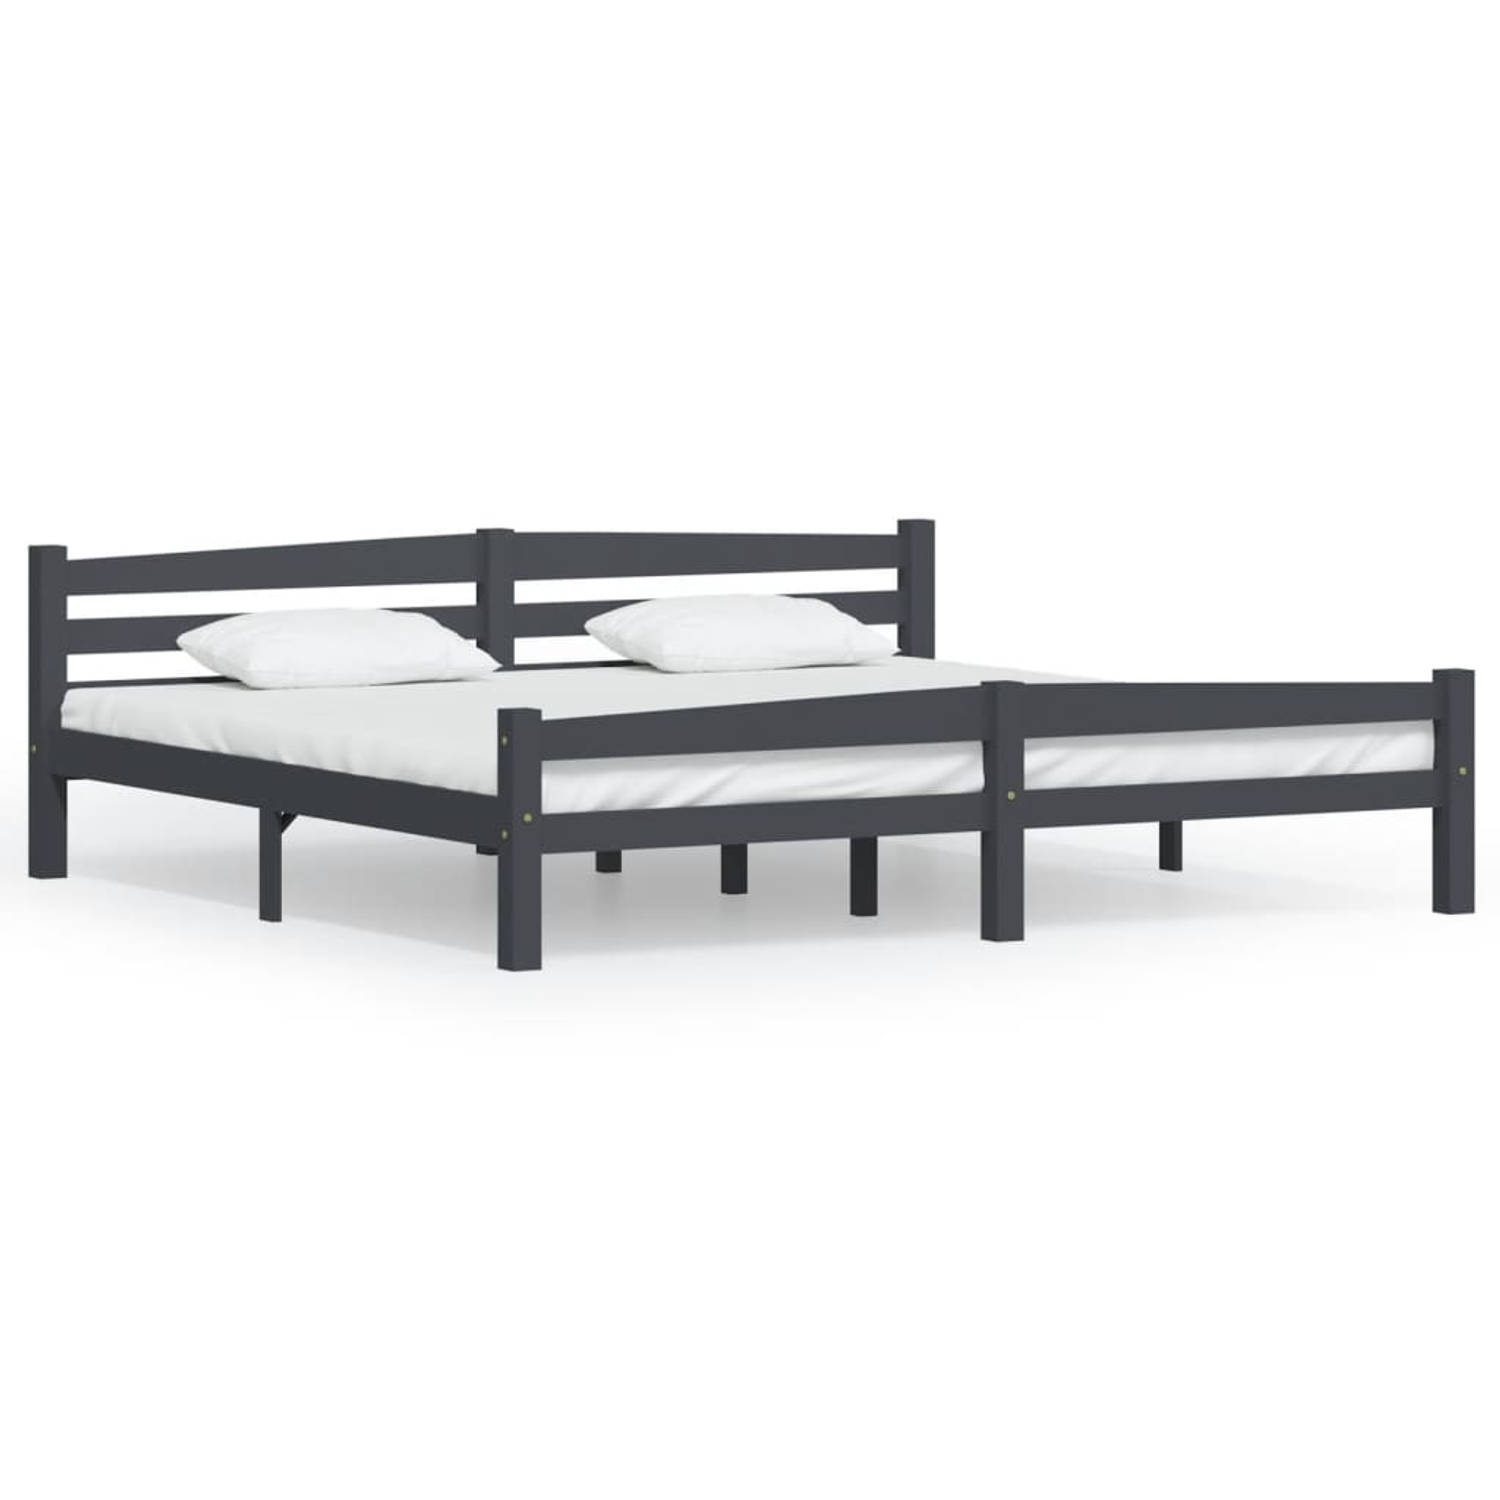 The Living Store Bedframe massief grenenhout donkergrijs 200x200 cm - Bed